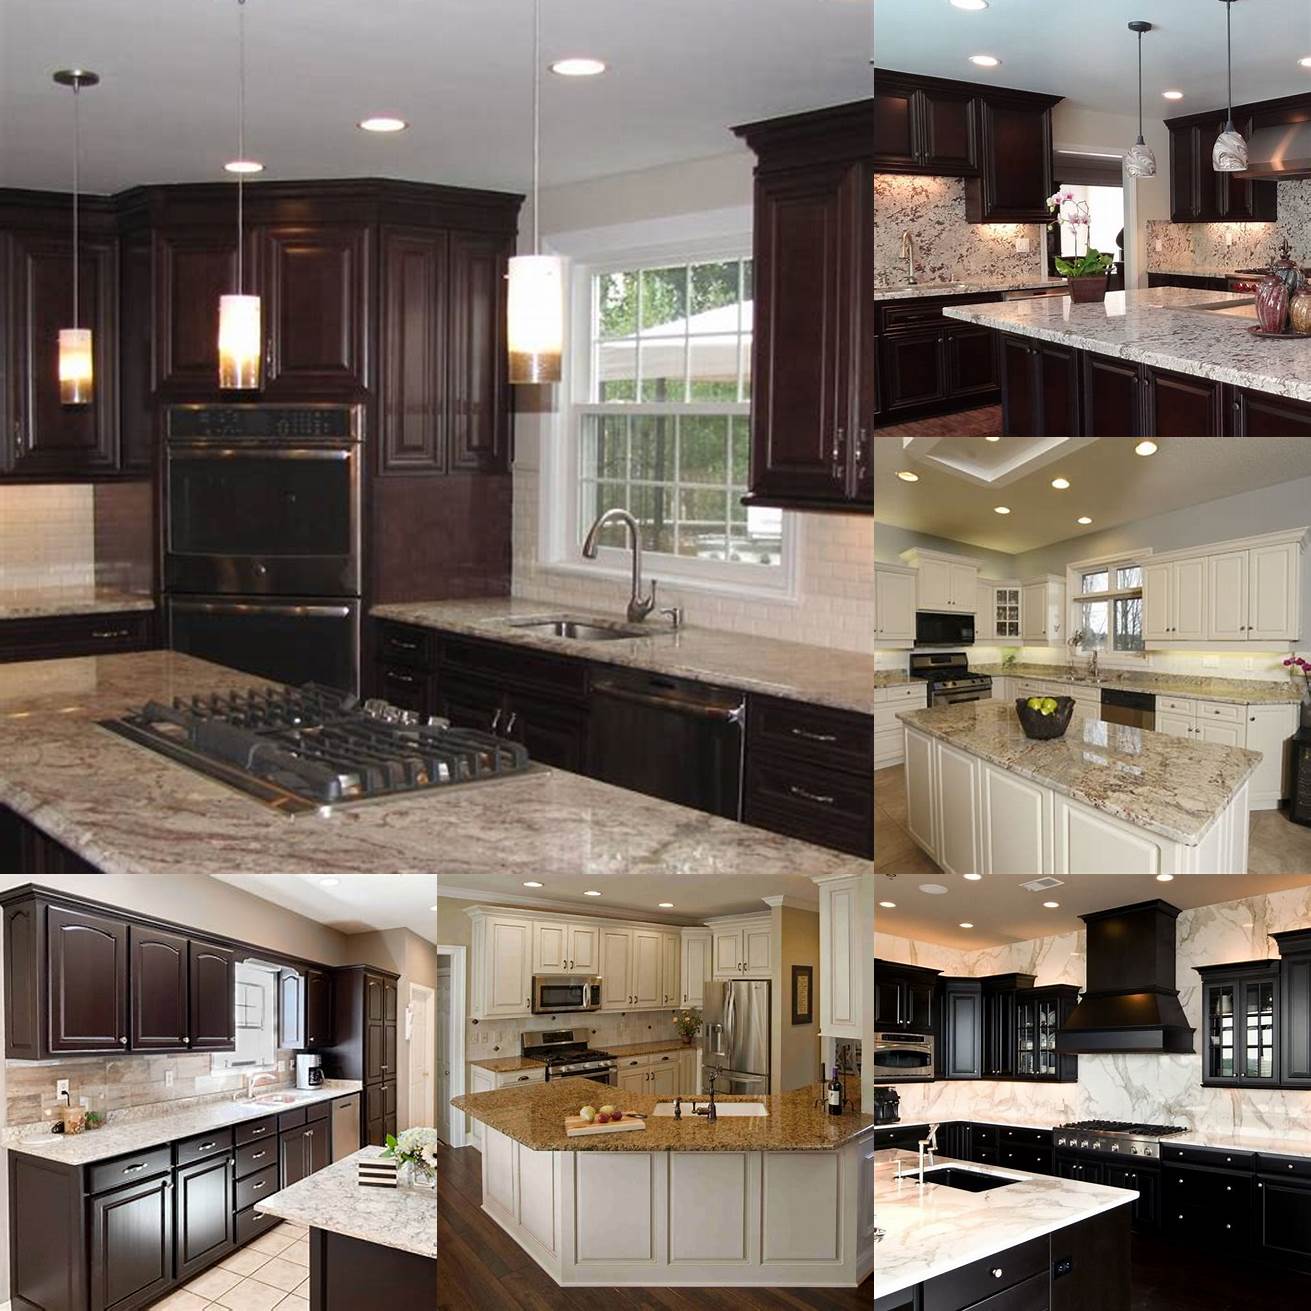 Dark brown kitchen cabinets with white marble countertops